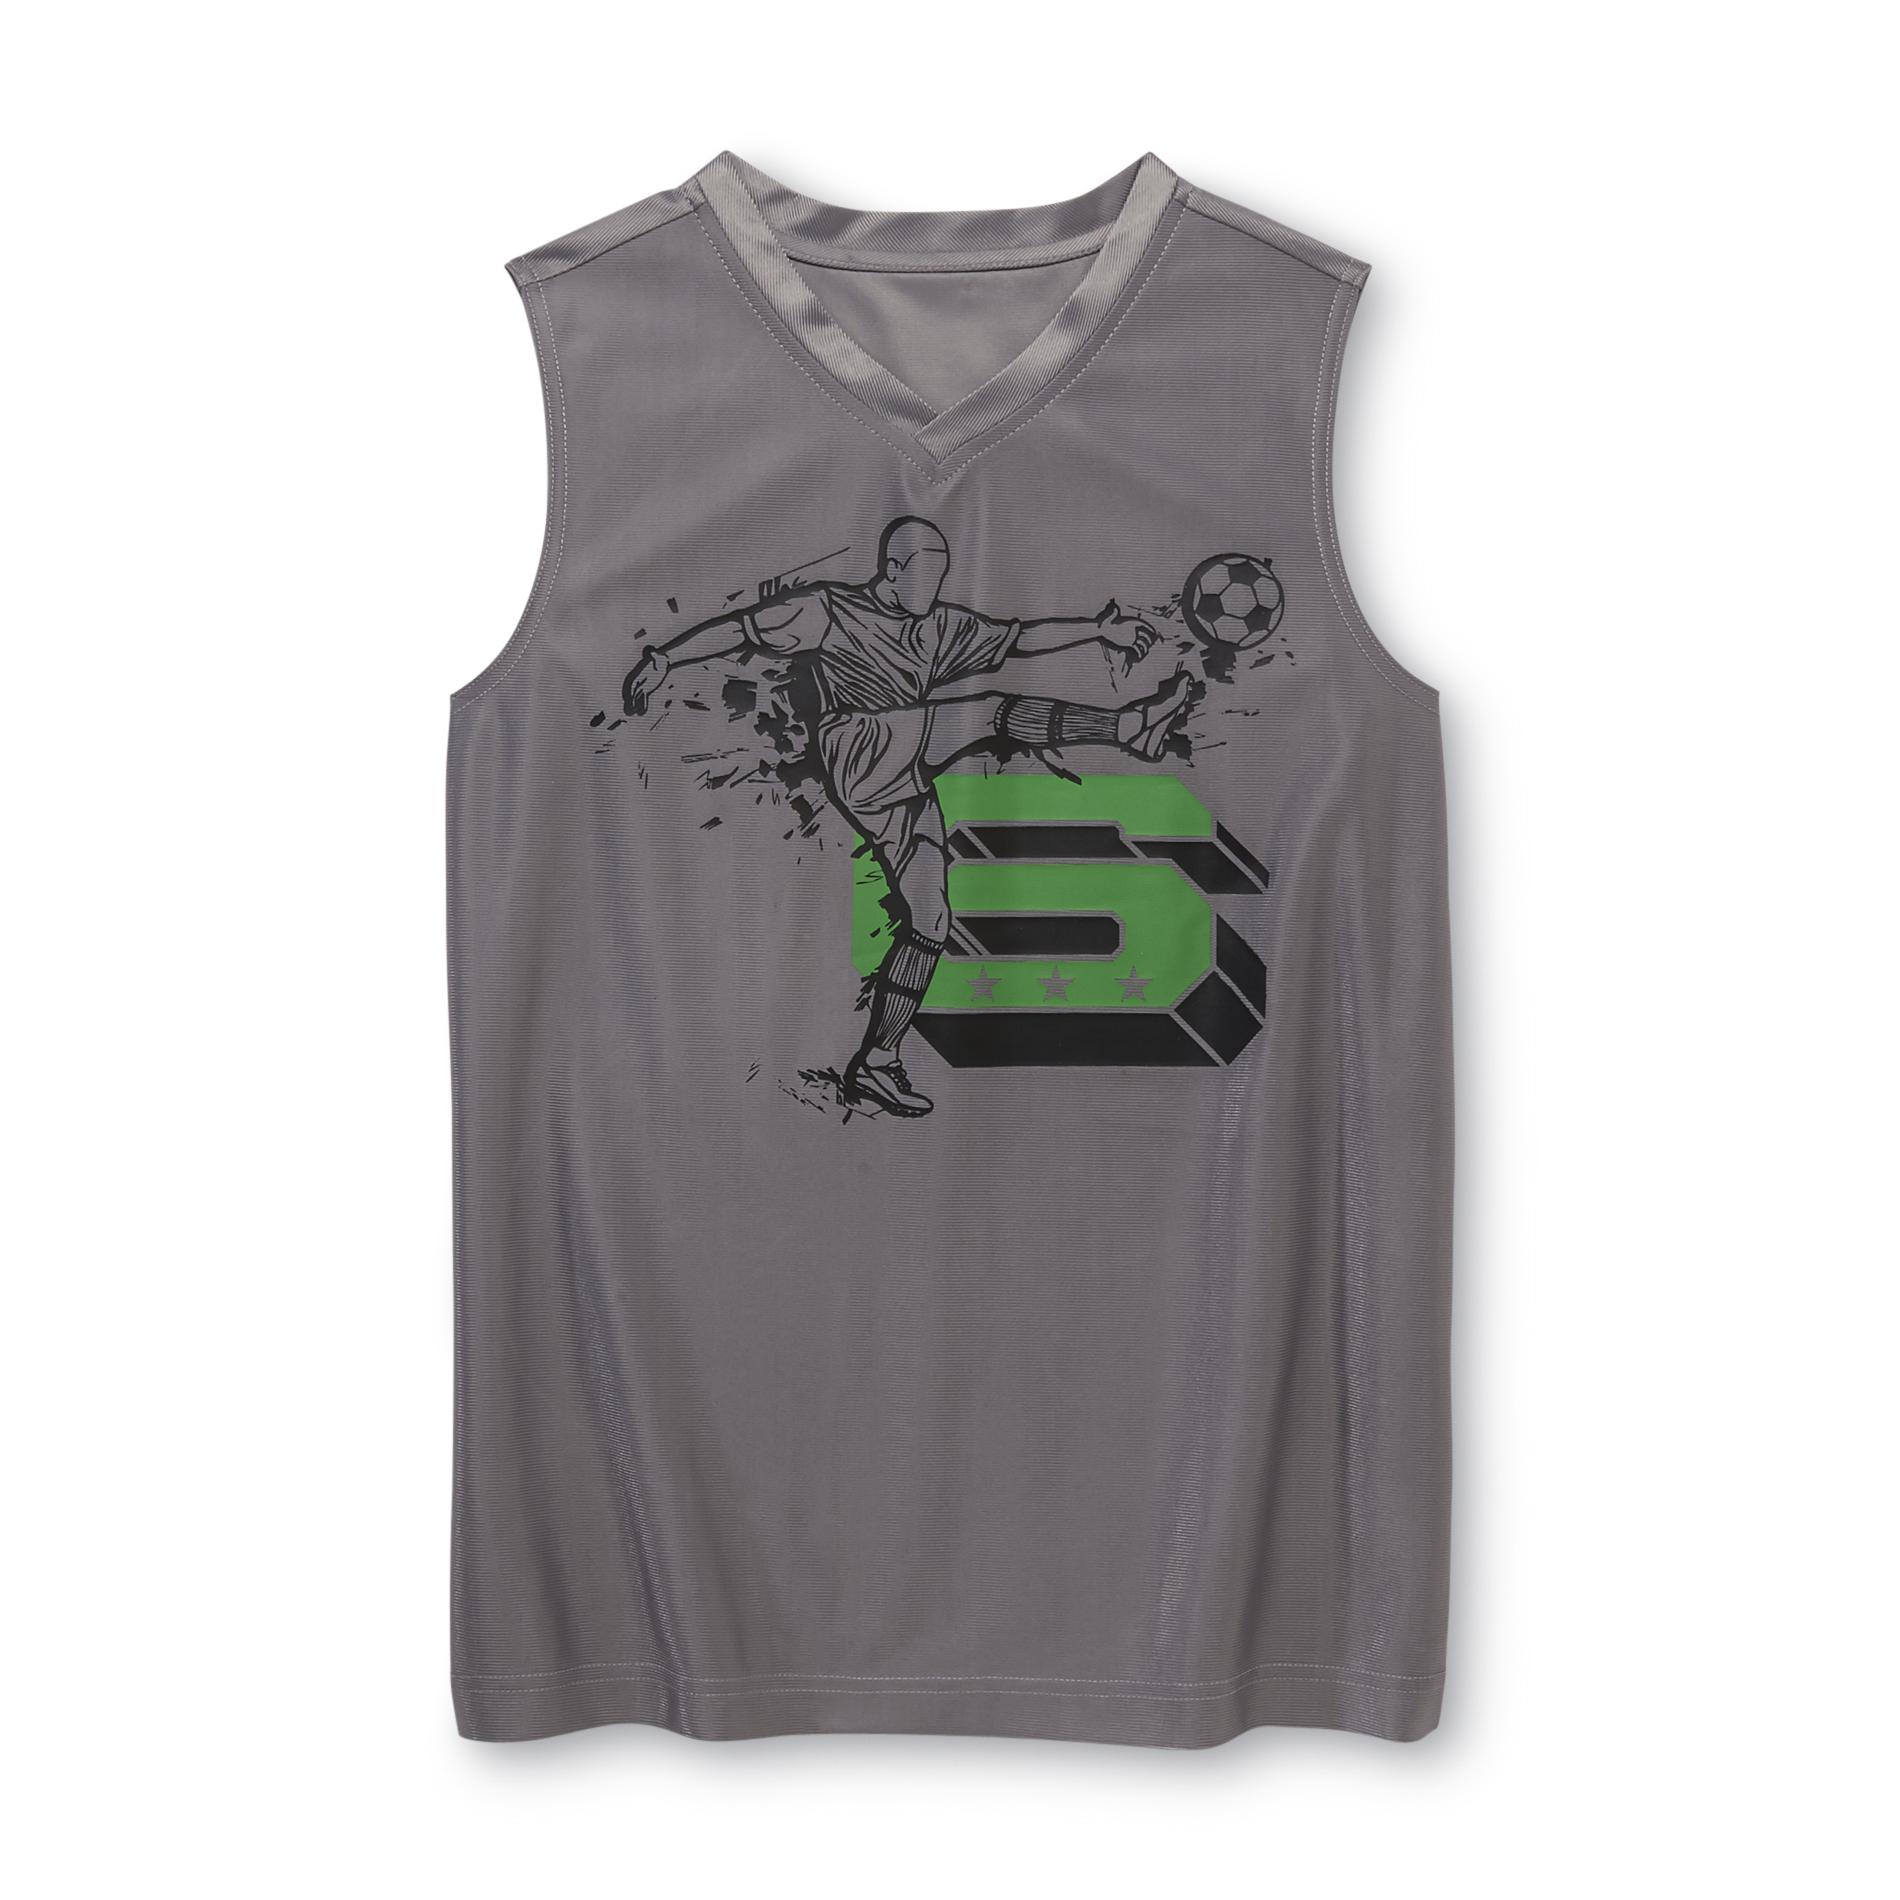 Athletech Boy's Graphic Muscle Shirt - Soccer